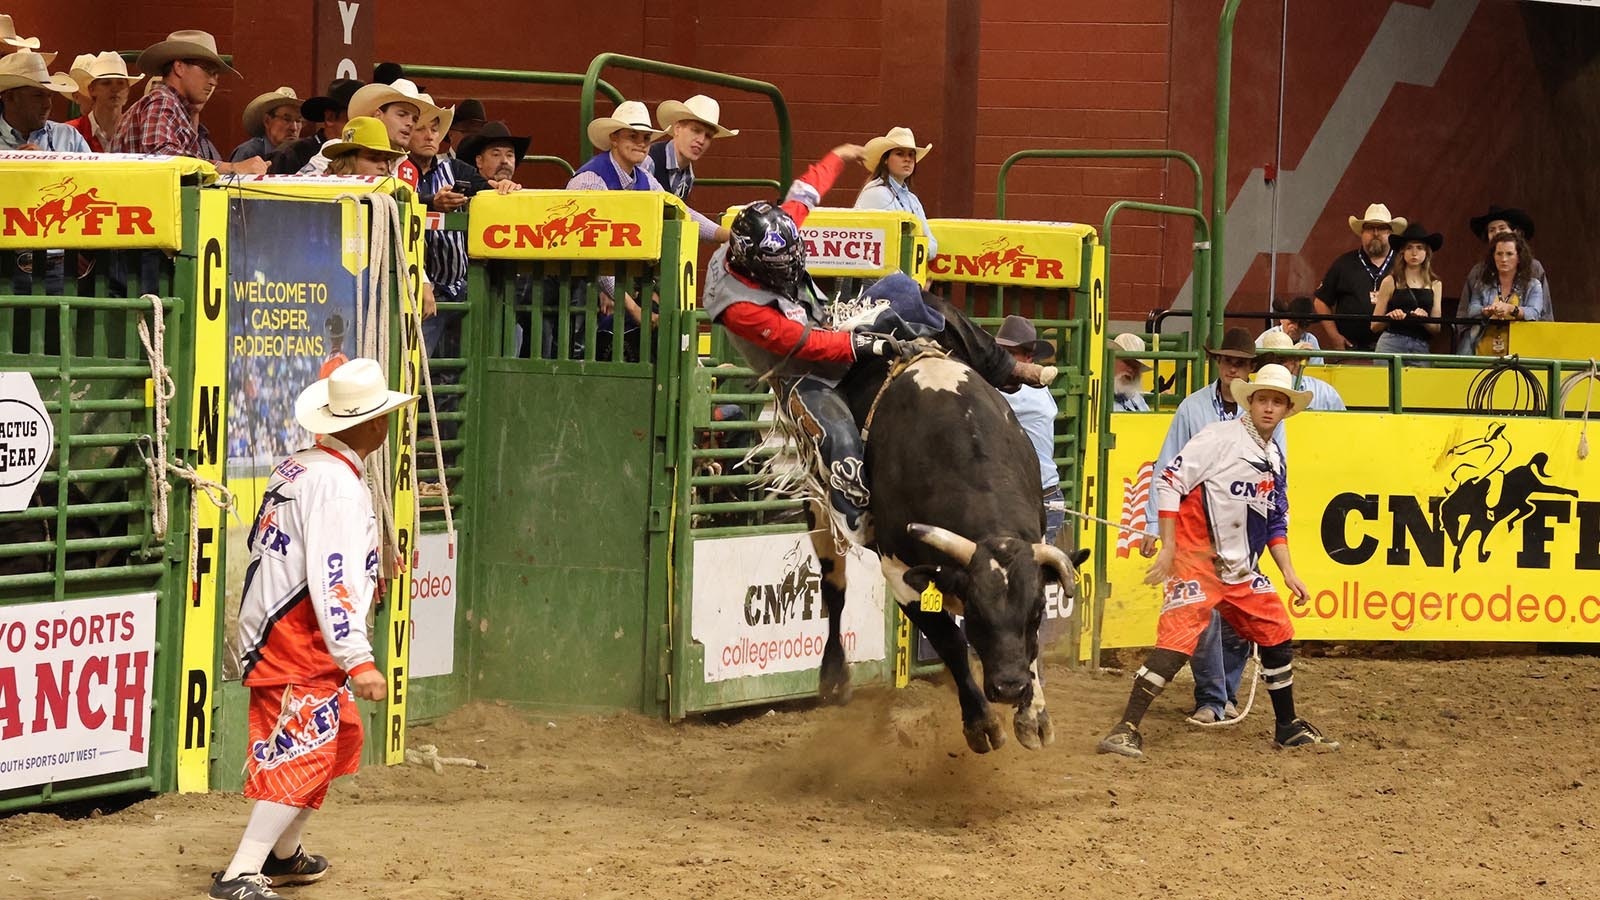 Thayne Elshere begins his exit off the bull during competition at the College National Finals Rodeo.